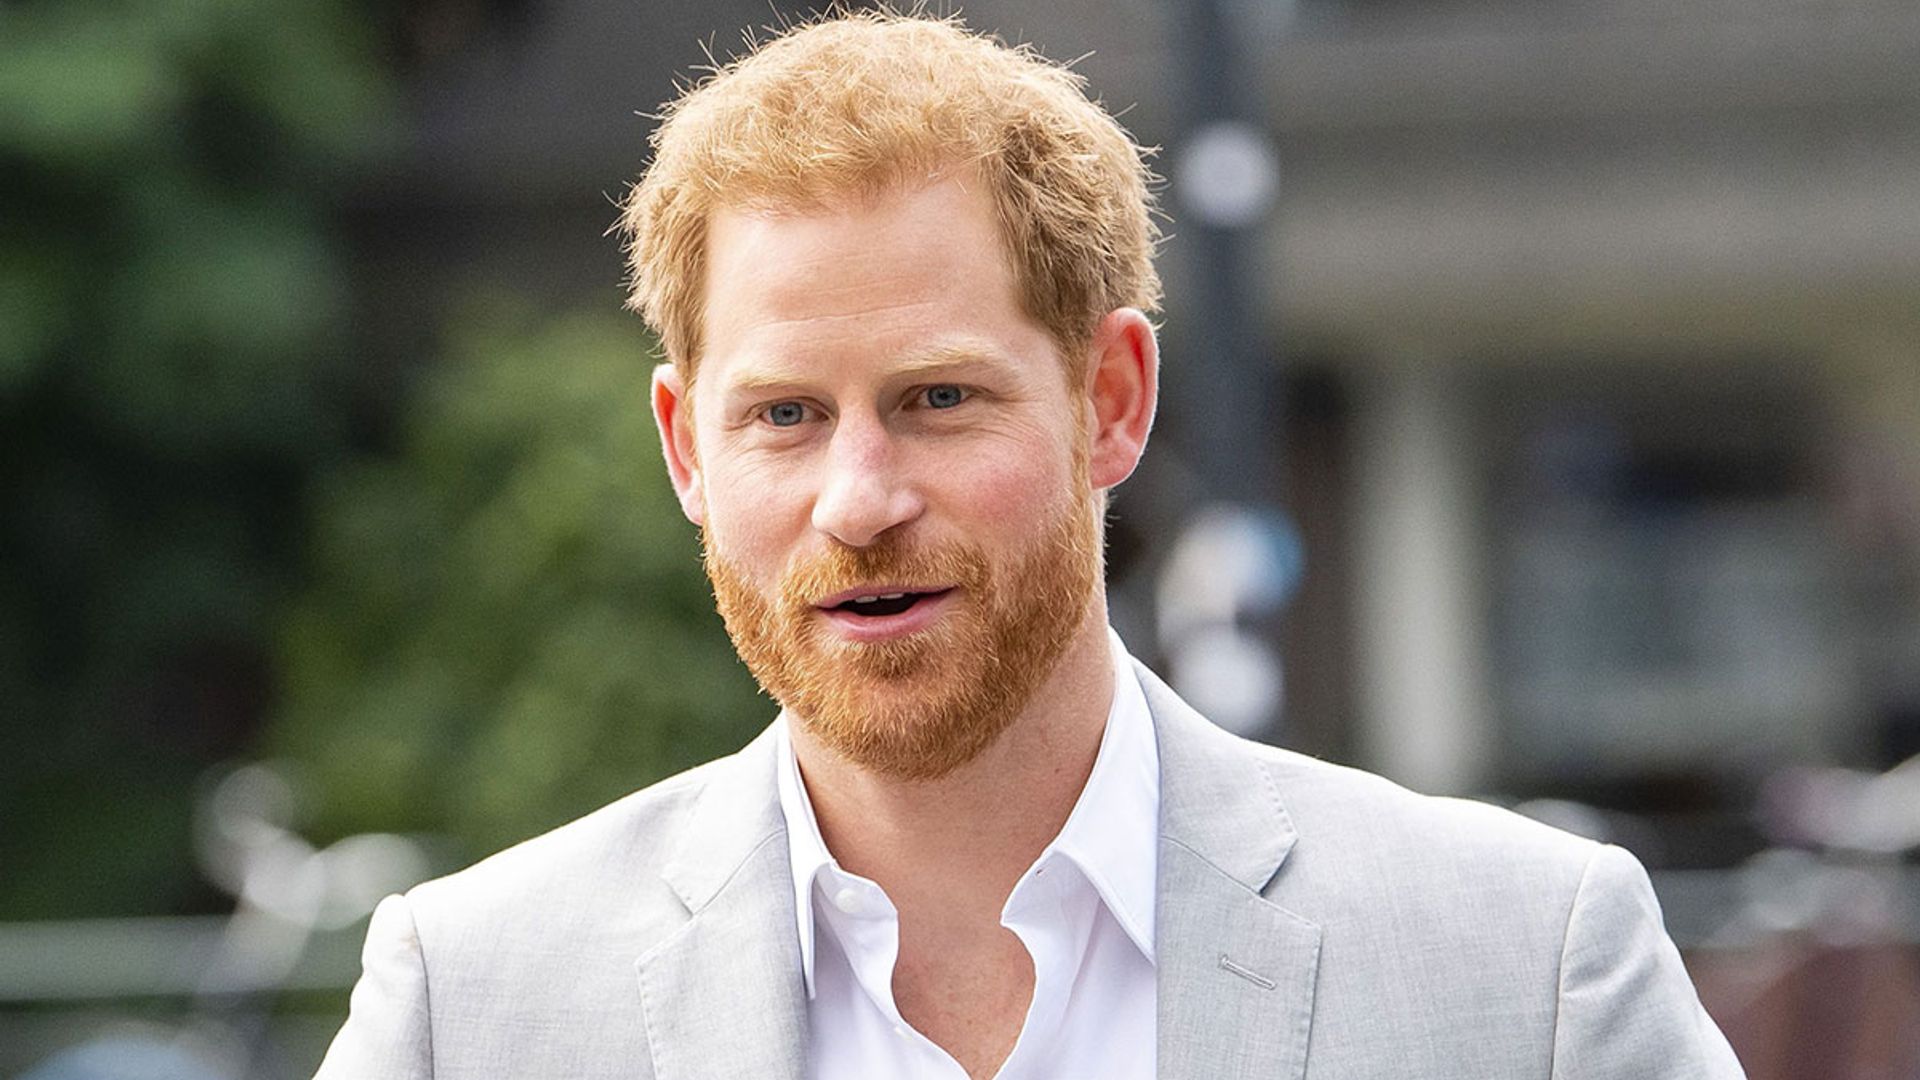 Prince Harry addresses use of private jets as he returns to work